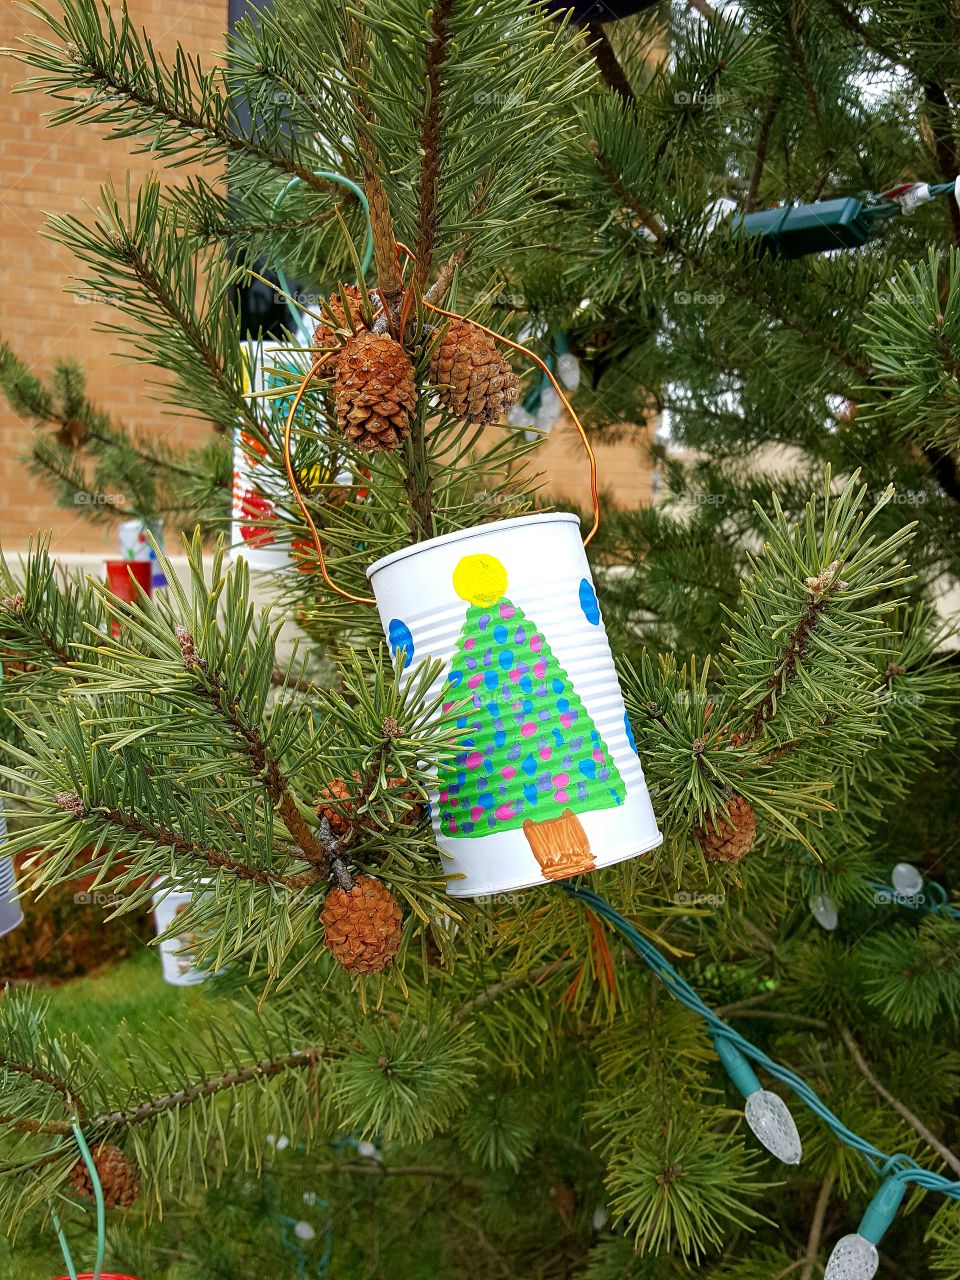 Some local daycare children in Kansas decorated these cans to use as ornaments on the community Christmas tree. They did such a good job!